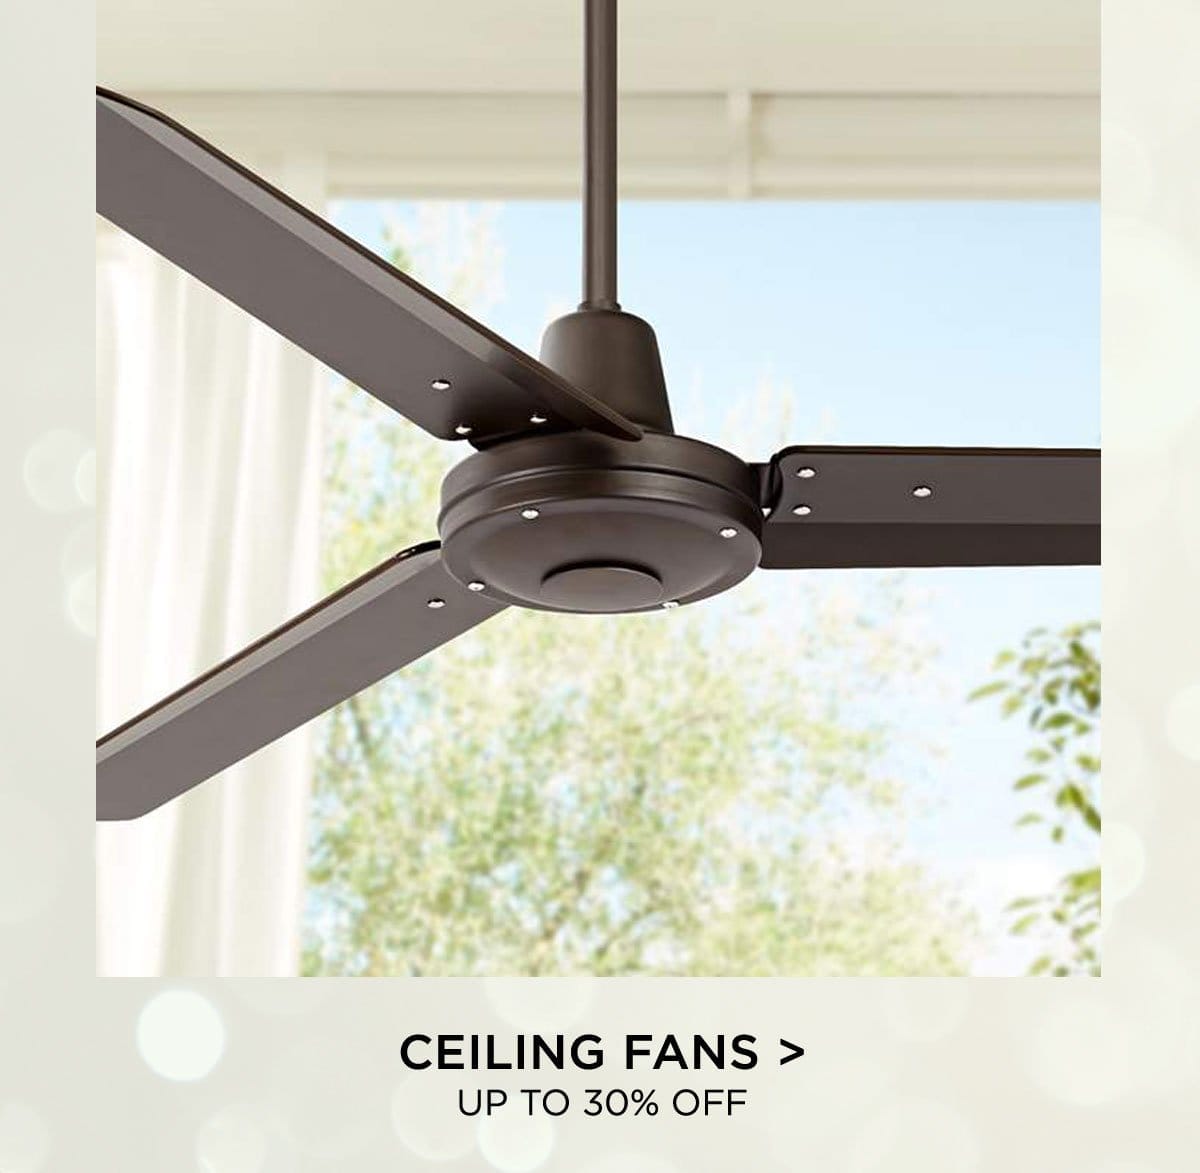 Ceiling Fans > Up to 30% Off